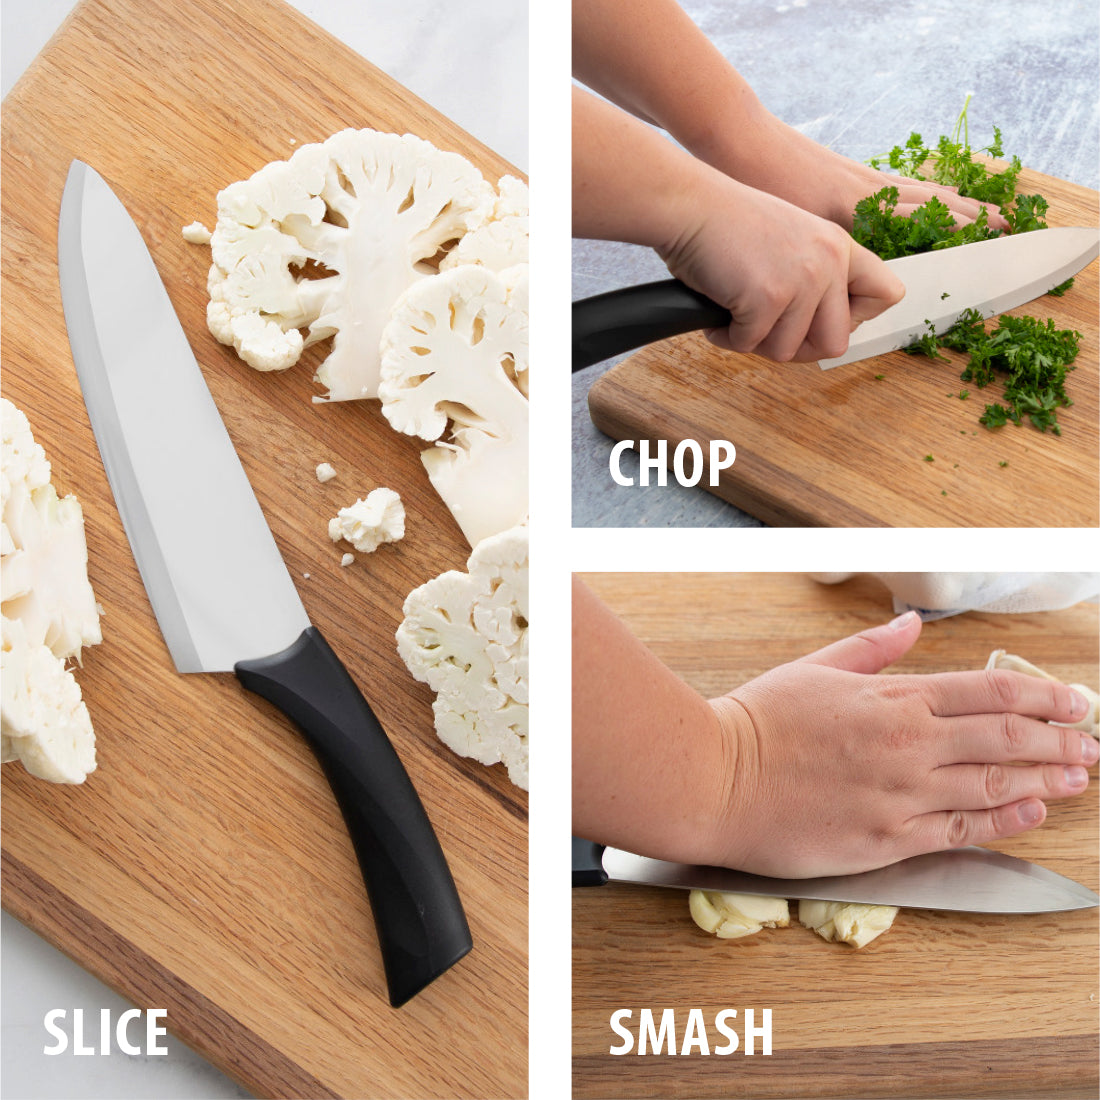 Quick Edge Knife Sharpener  Easy and Convenient - Rada Cutlery